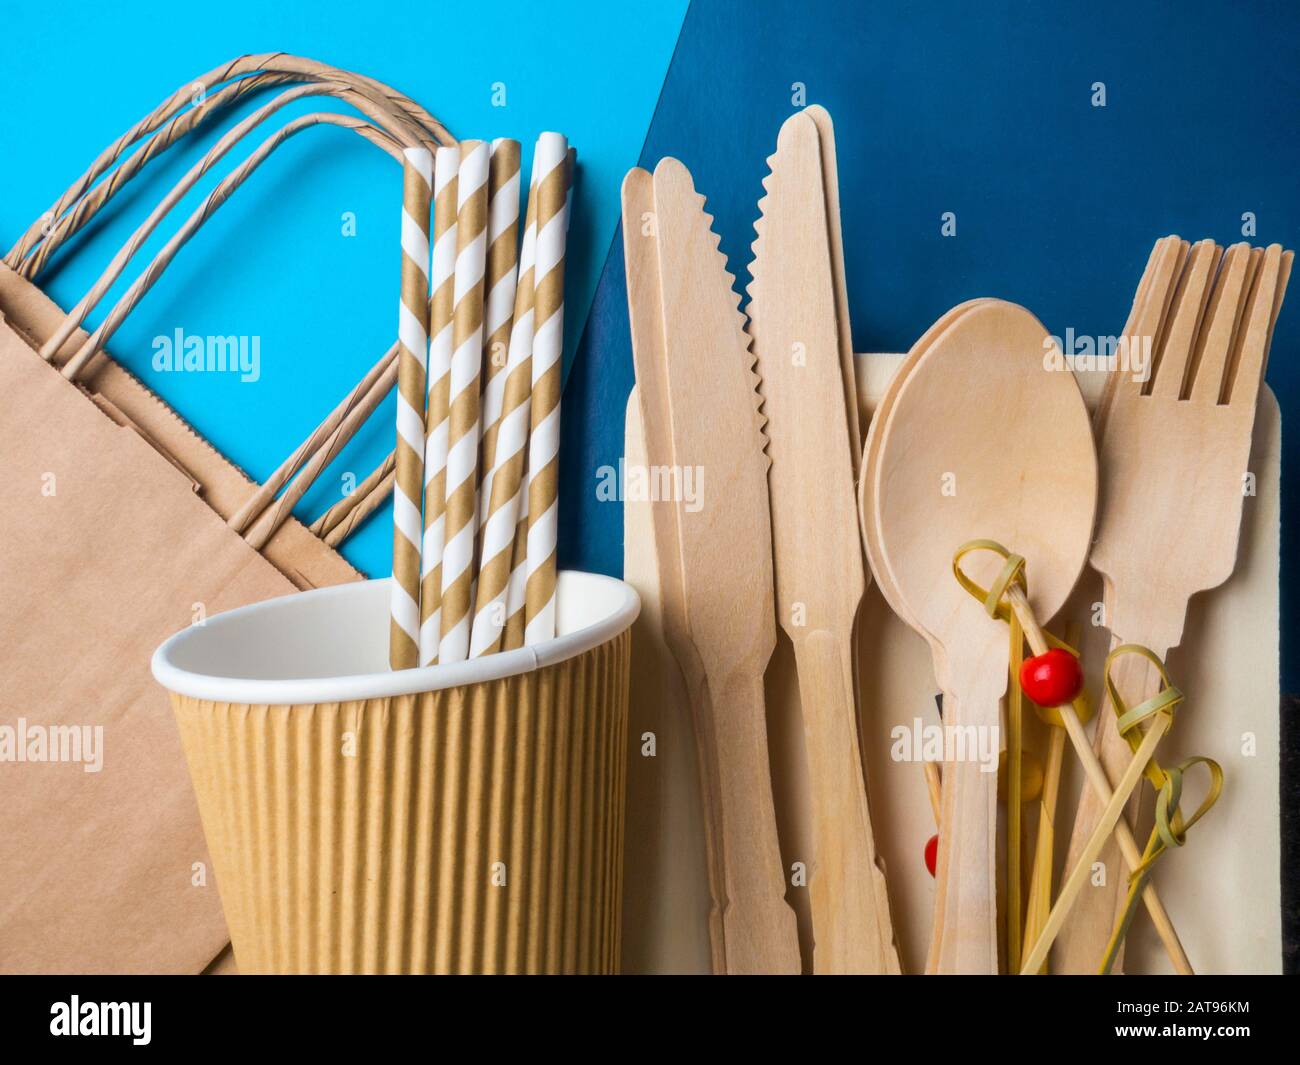 Disposable wooden cutlery and paper bag on trendy blue color background,  cutlery, recycling and eco friendly concept, plastic-free alternatives zero  Stock Photo - Alamy